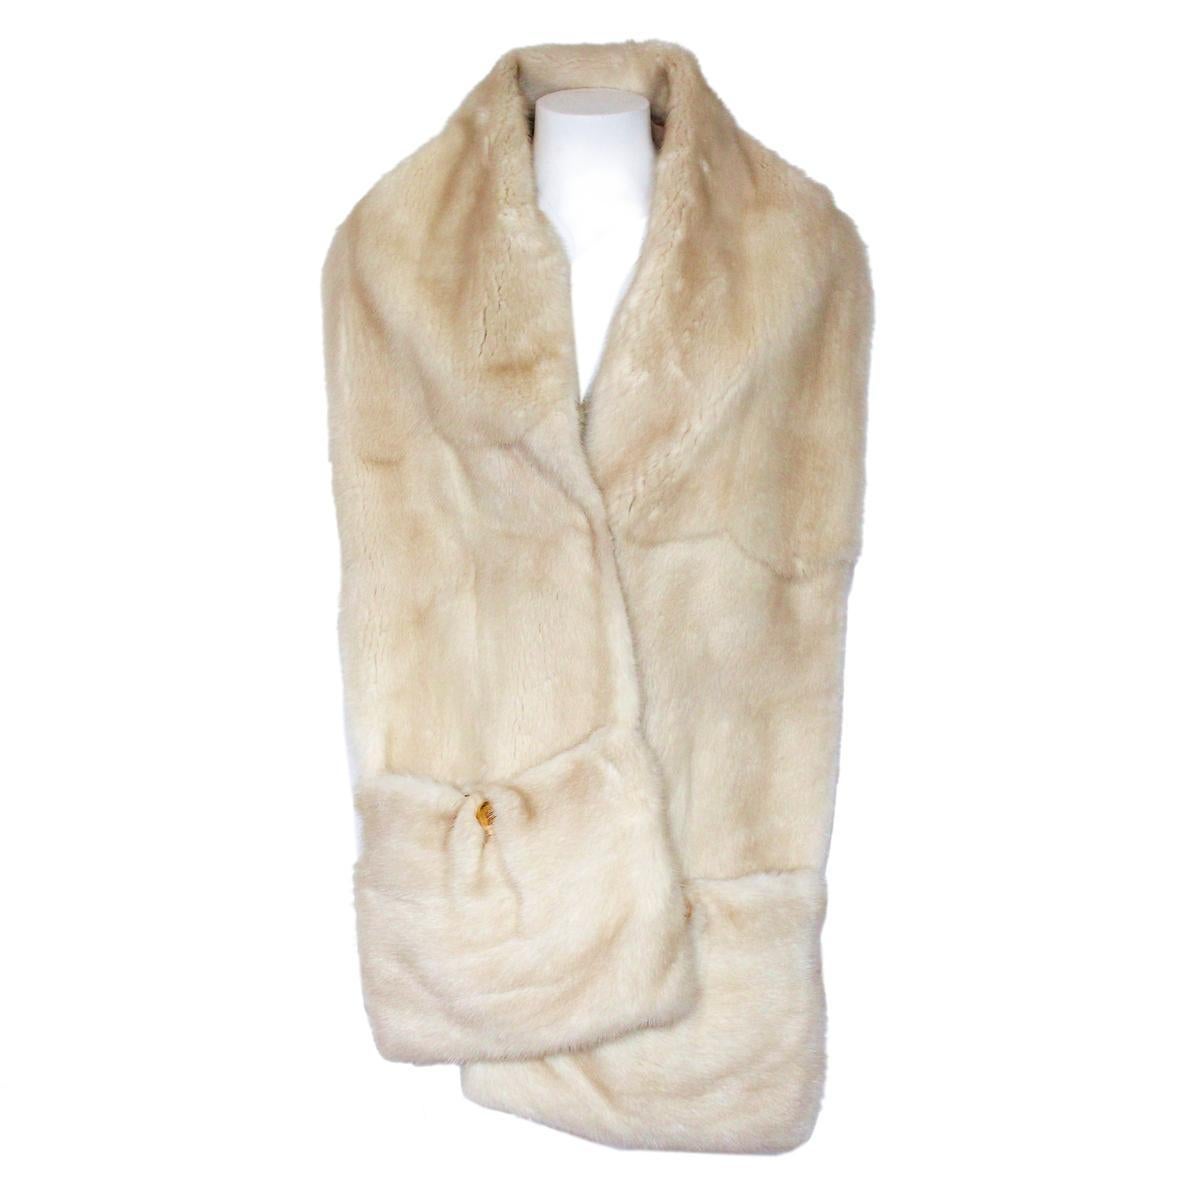 Wonderful and classy stole fur by Pagano Bergamo - Porto Cervo, Italy
Real mink
Ivory color
Two pockets
Golden buttons
Cm 200 x 29 (78.7 x 11.4 inches)
Worldwide express shipping included in the price !